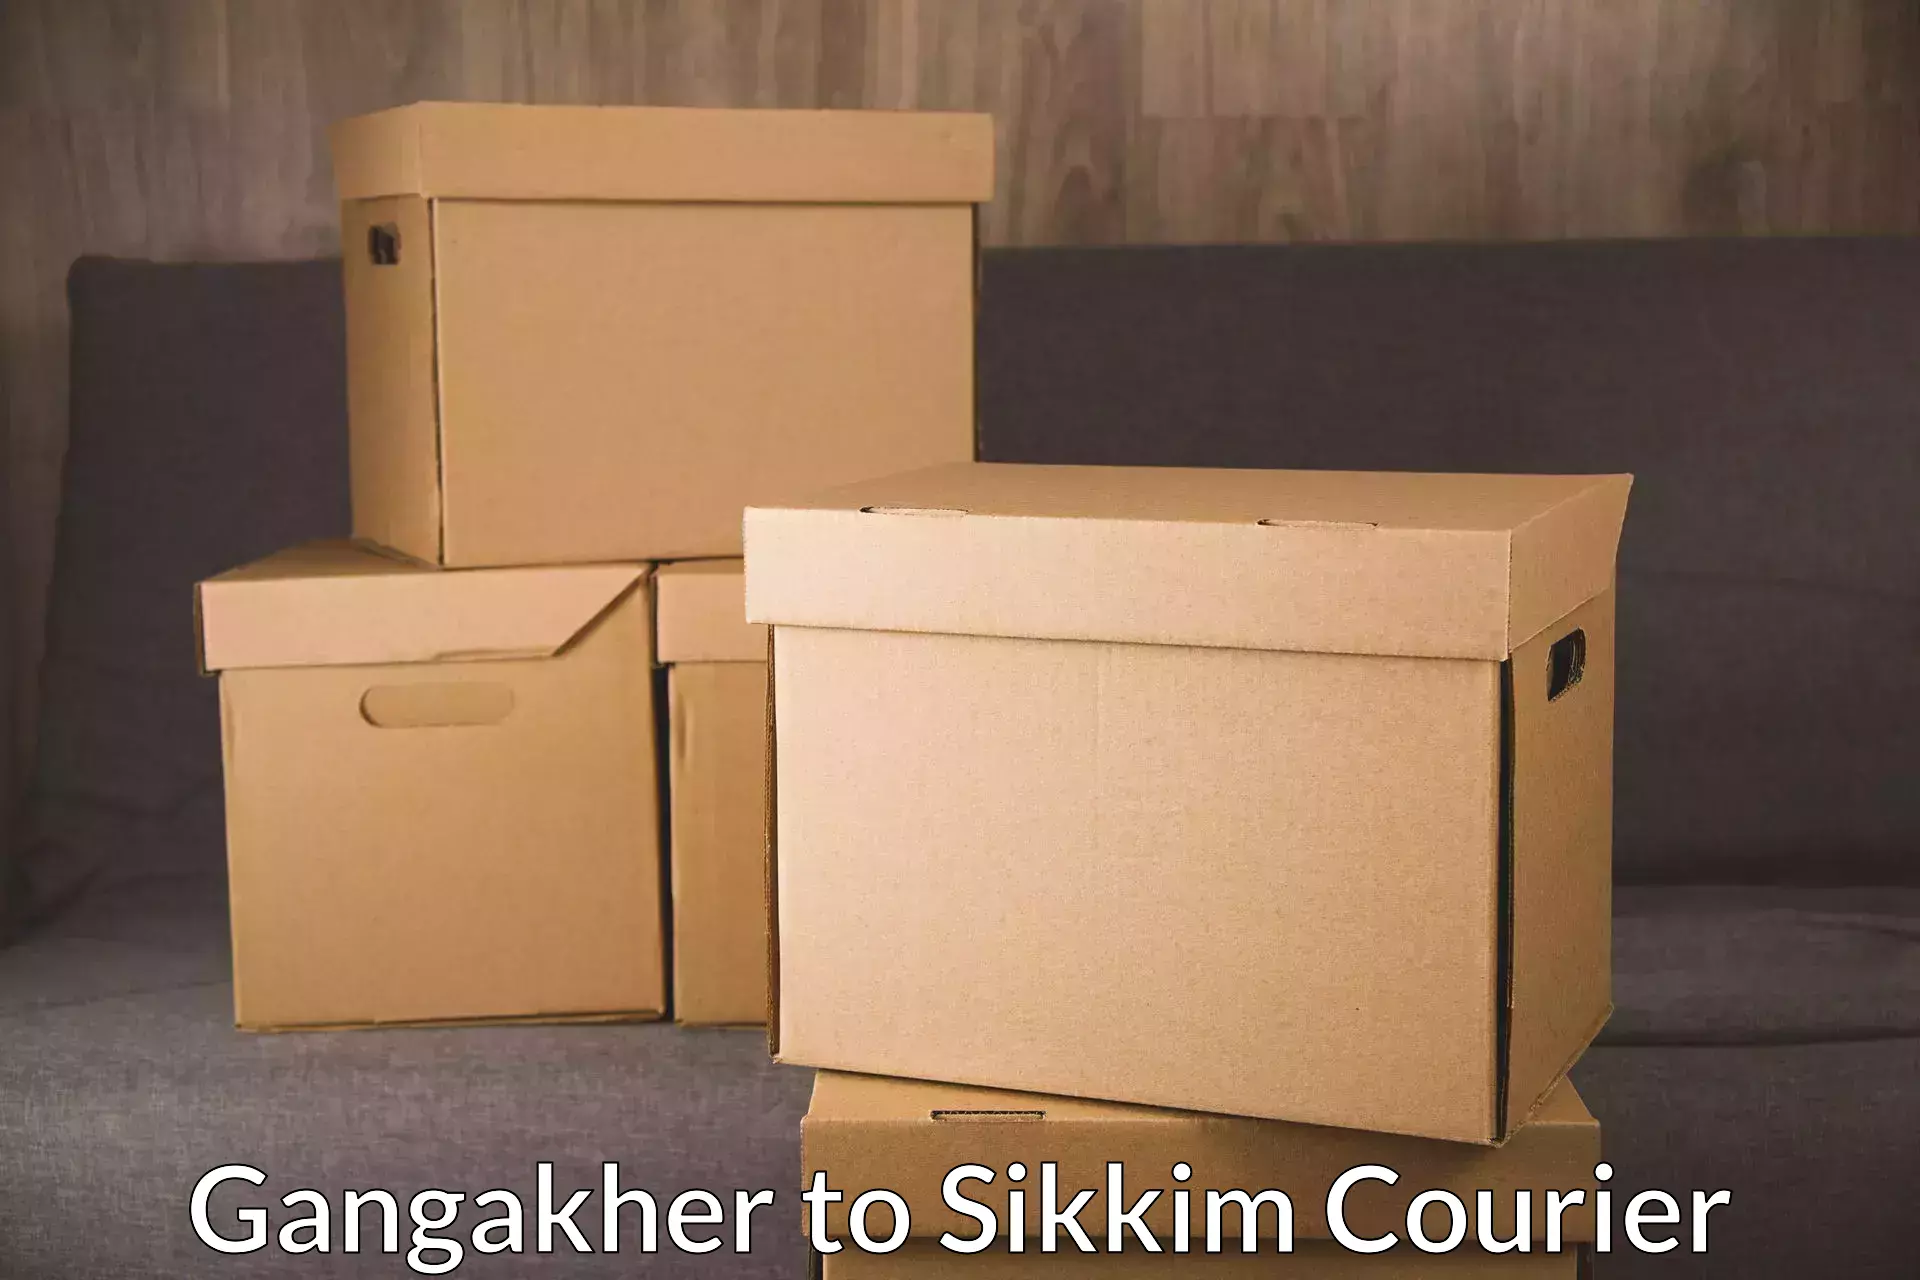 High-capacity shipping options Gangakher to North Sikkim